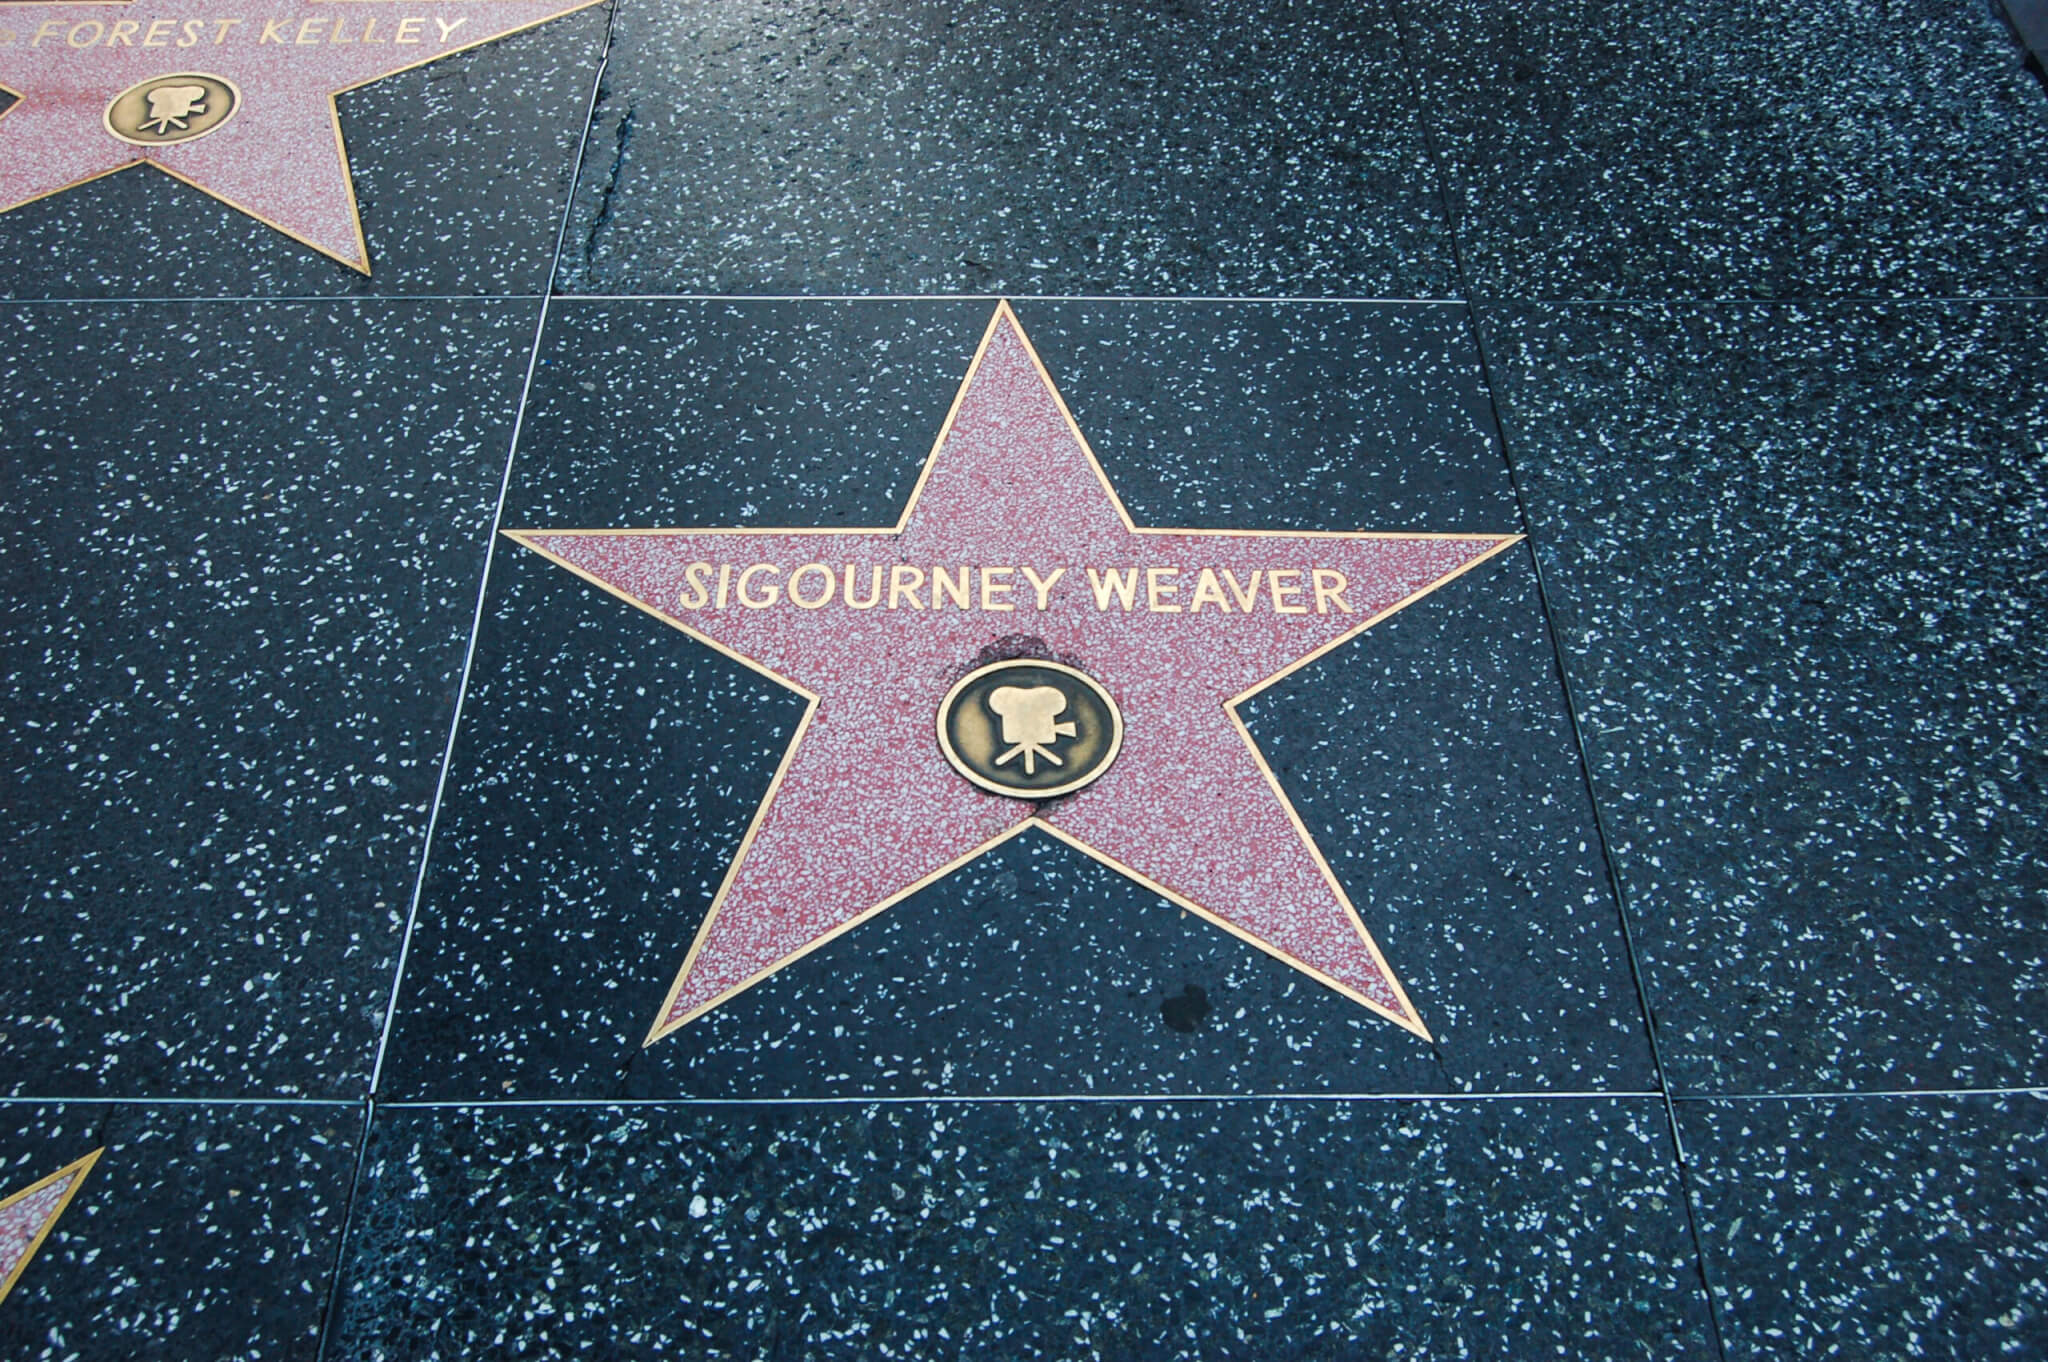 Sigourney Weaver's star on the Hollywood Walk of Fame